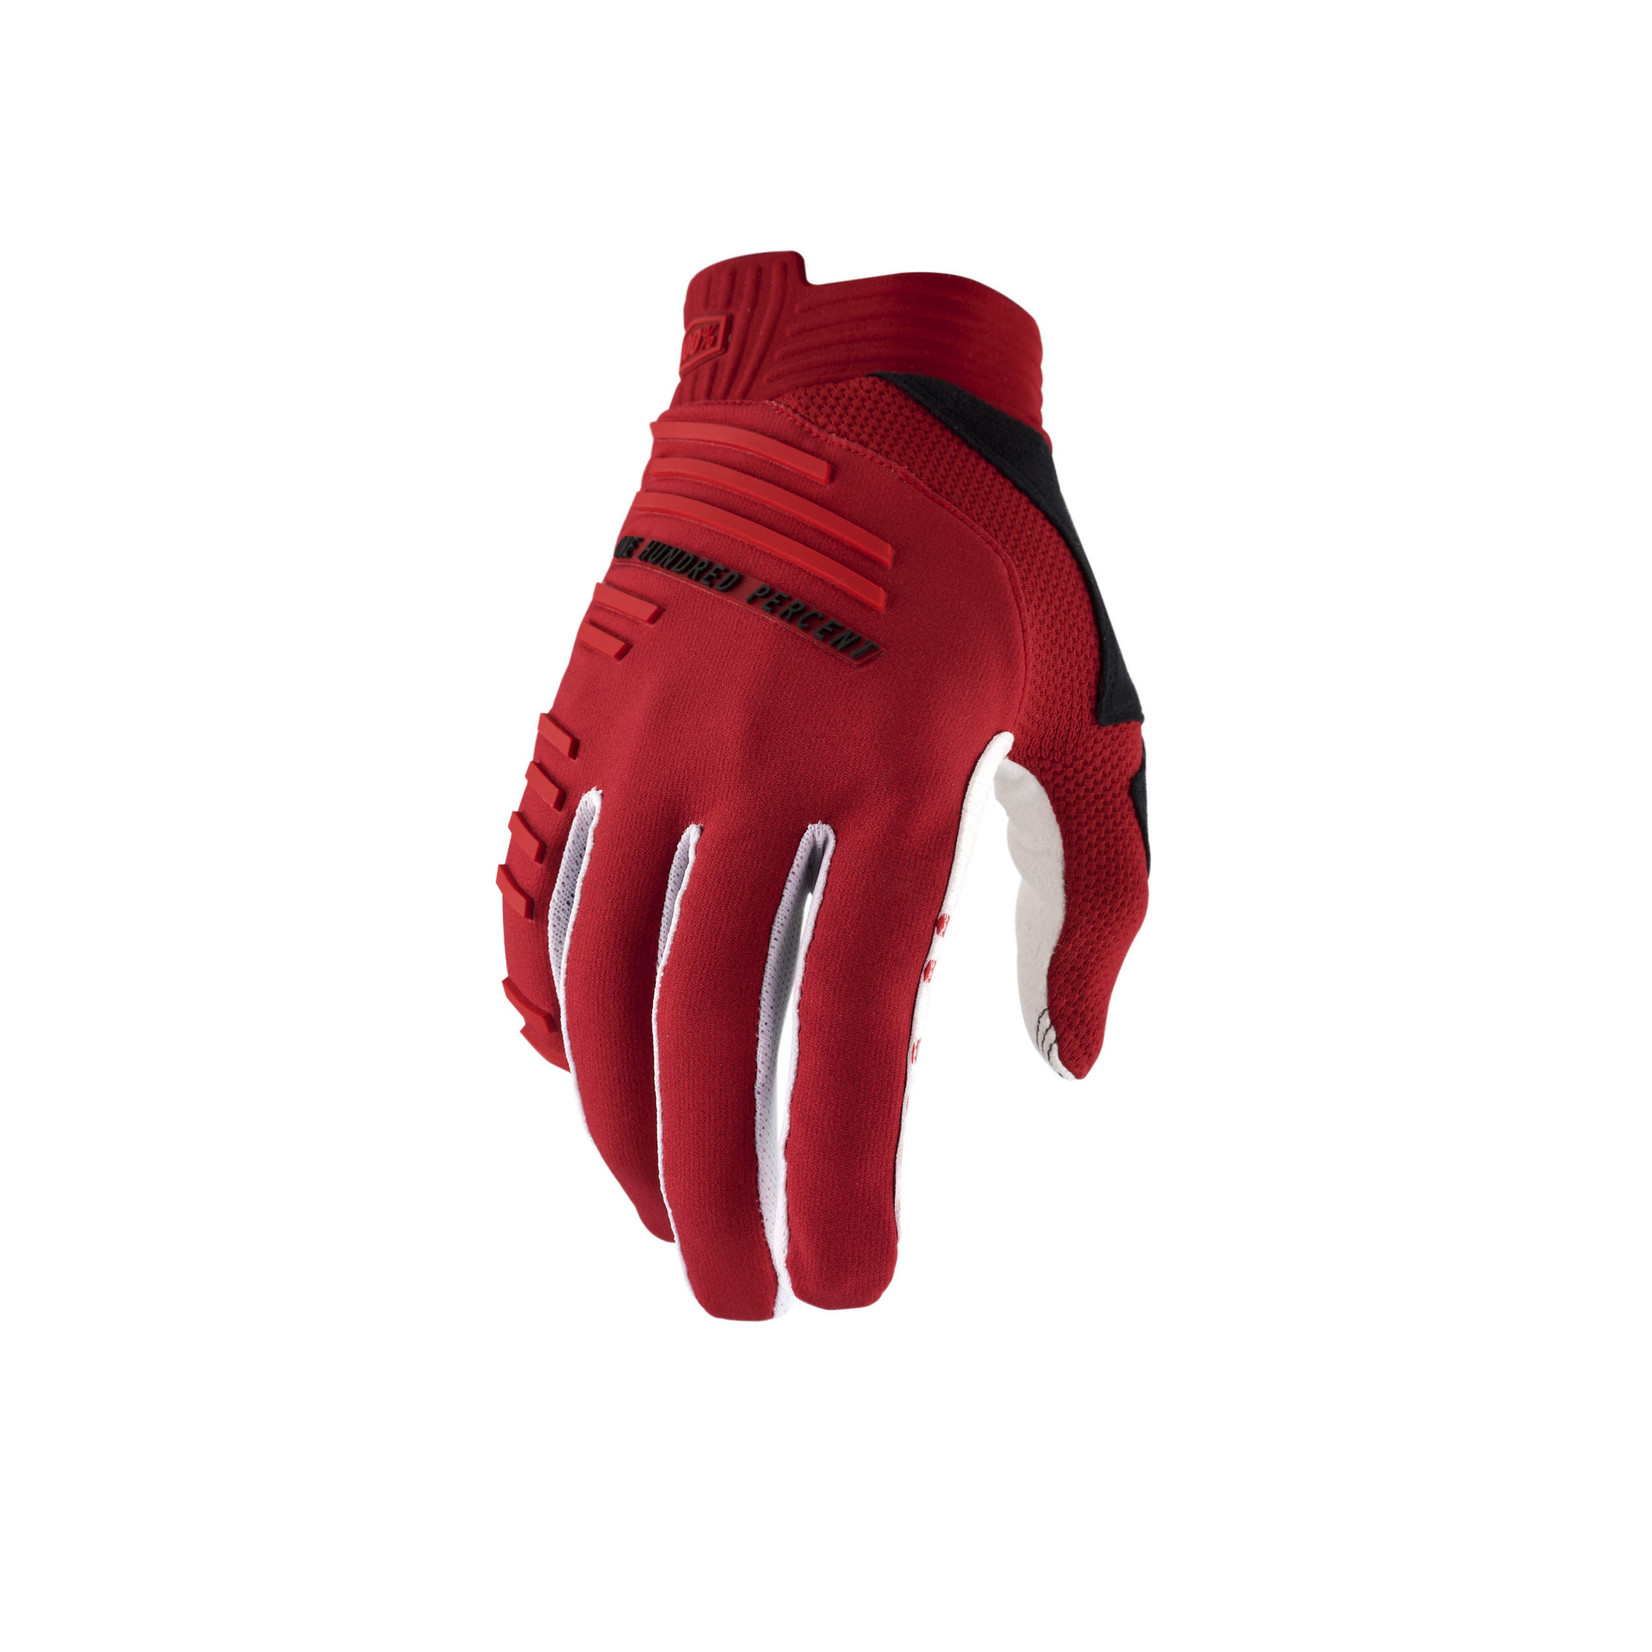 FE sports 100% R-CORE Adjustable TPR Cycling Glove - Cherry